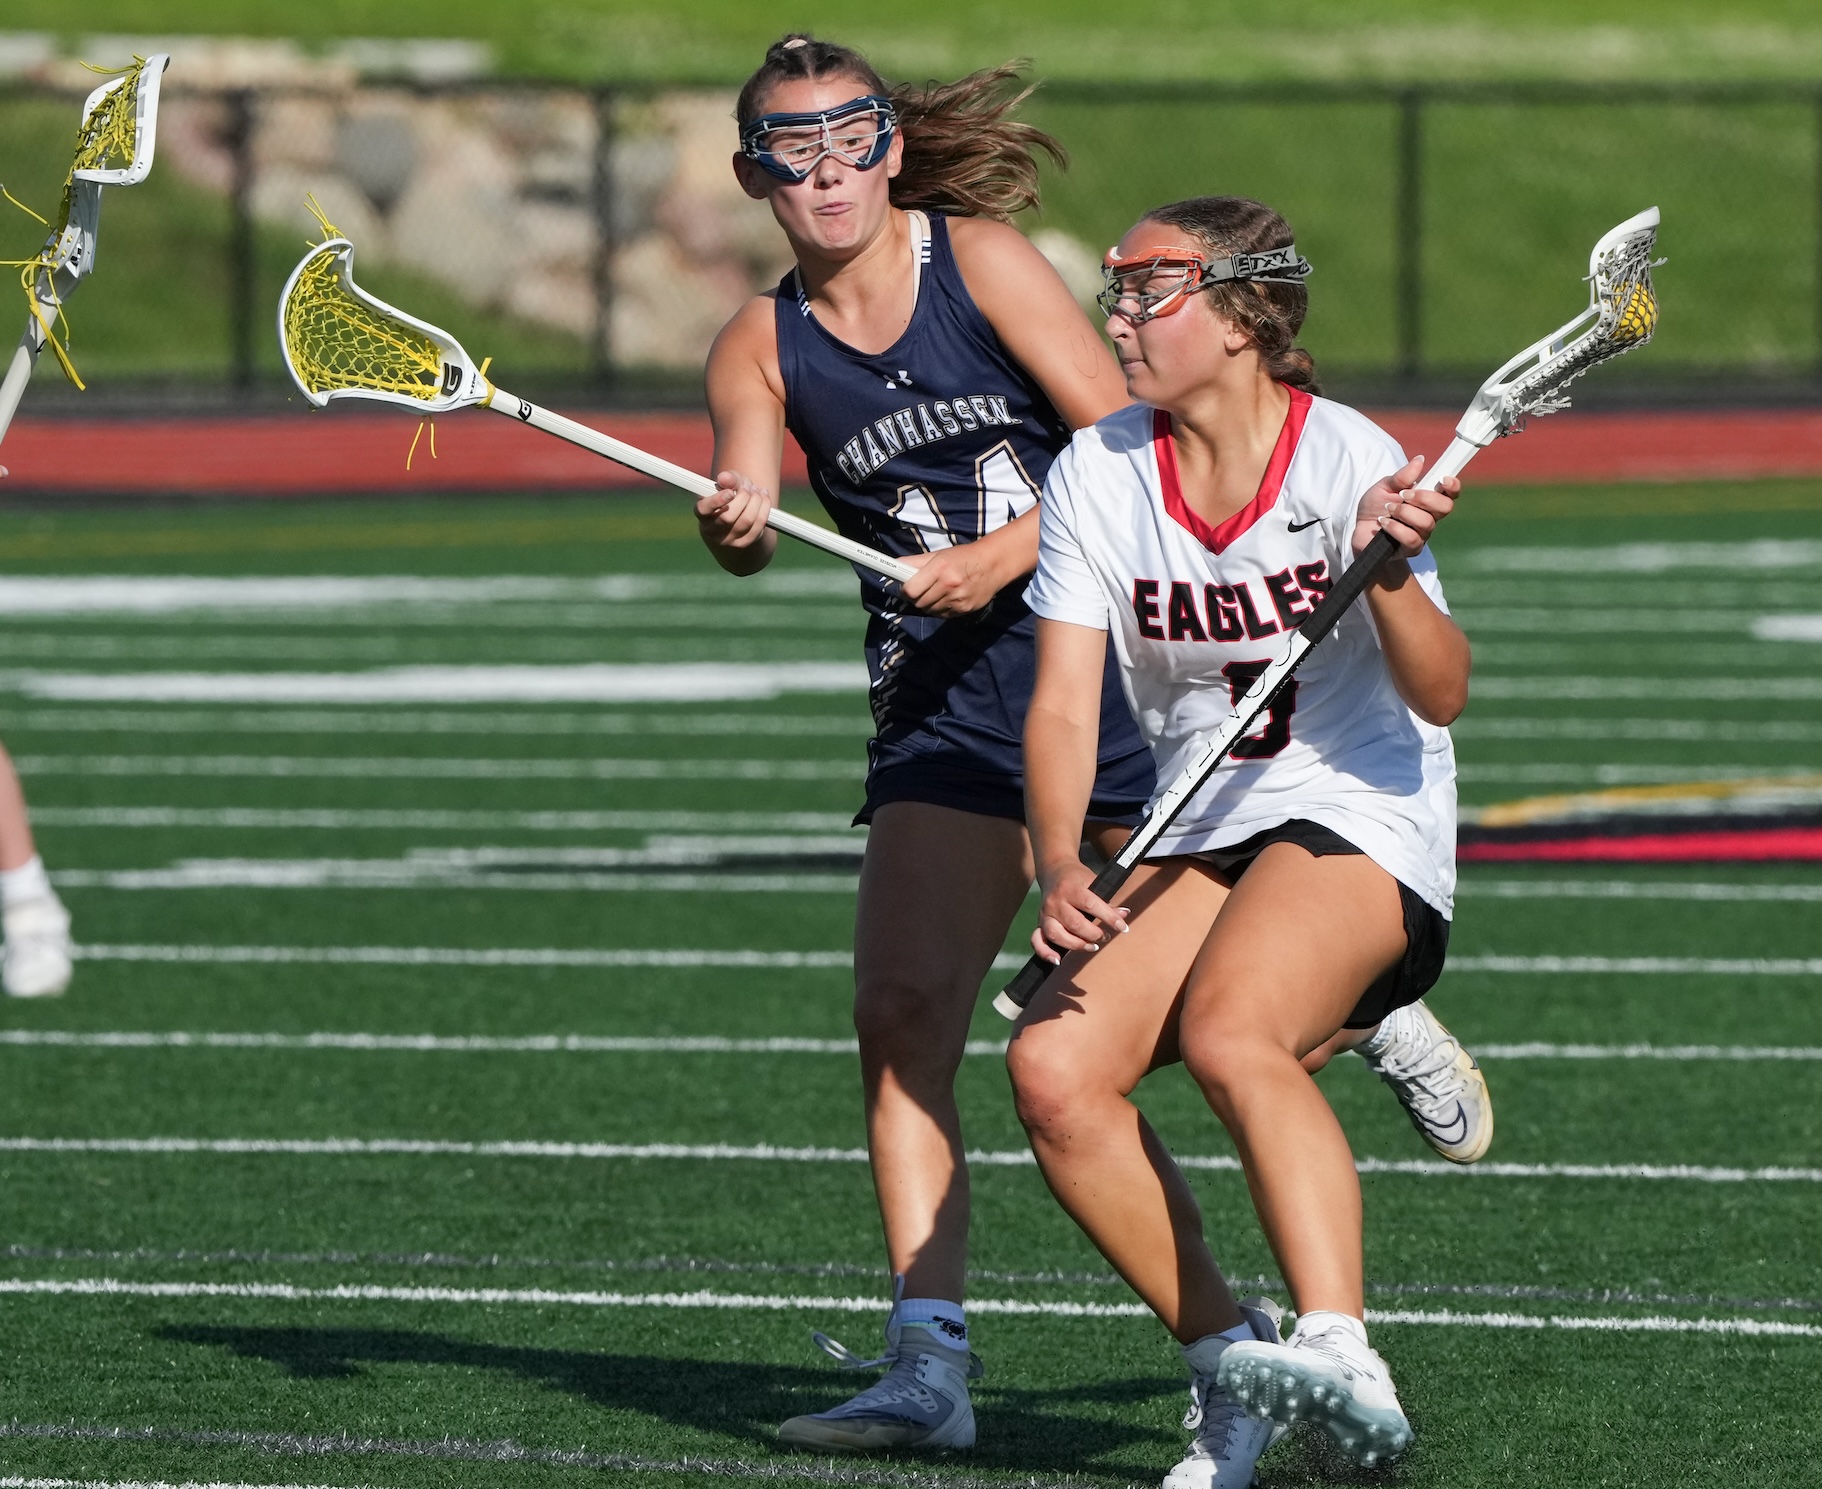 EPHS Lacrosse Teams to Compete in Section Championships